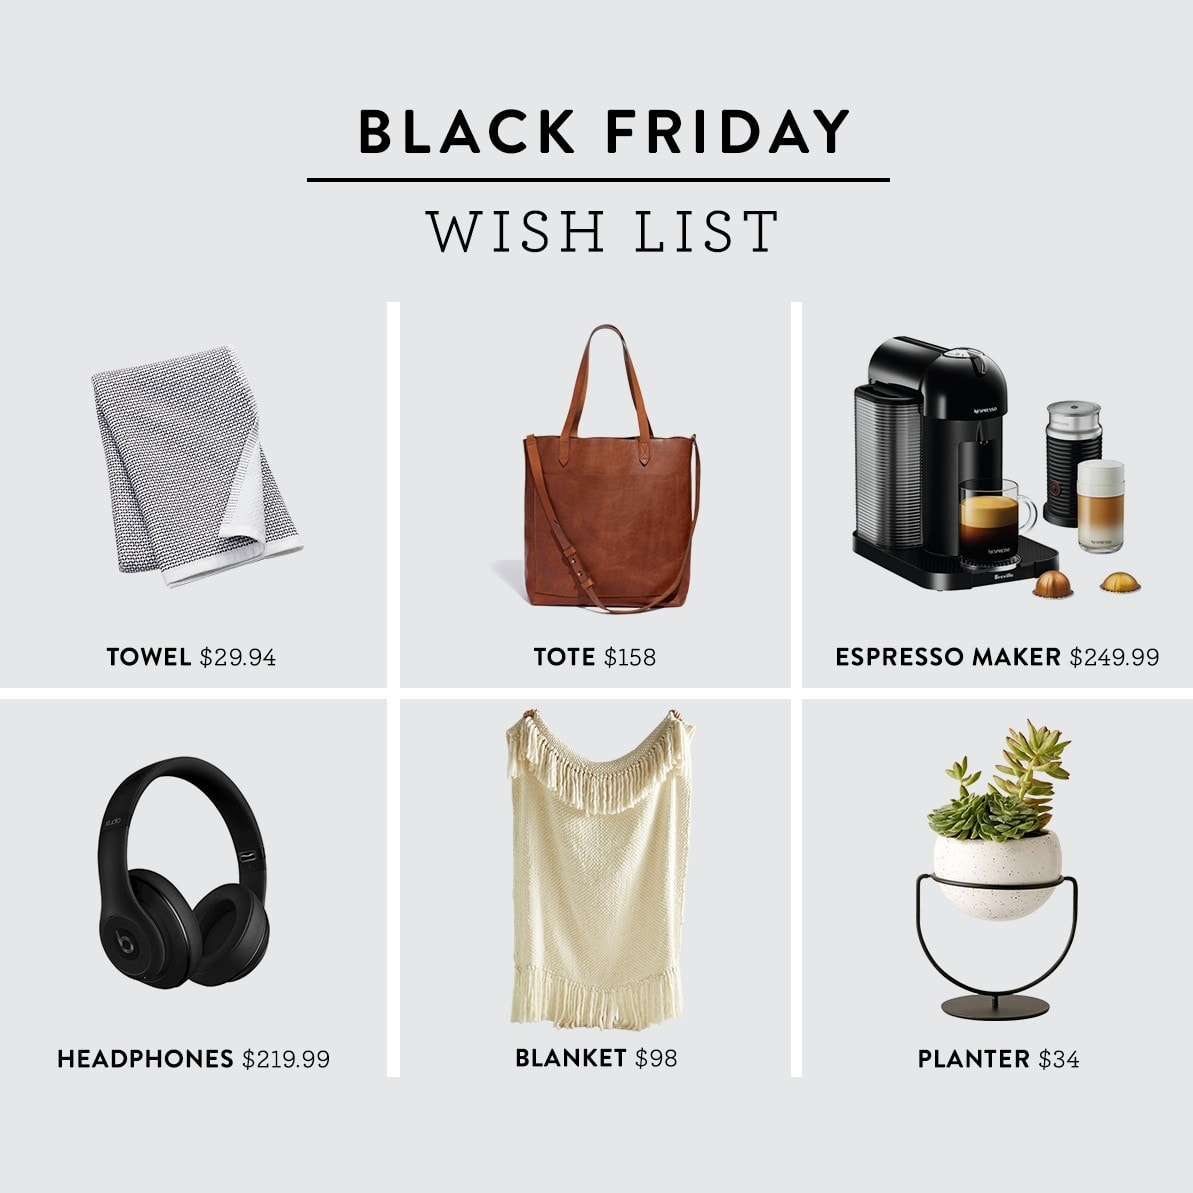 Black Friday is this week. I have never been one to get up super early to stand in line, but you all know I am a sucker for a good deal! I decided to do a little research before Black Friday to scope out some of my favorite retailers to make a wish list for Black Friday! I wanted to keep all of you in the loop, so below is my Wishlist for Black Friday! Fingers crossed I can get some staple pieces for winter! HAPPY SHOPPING!